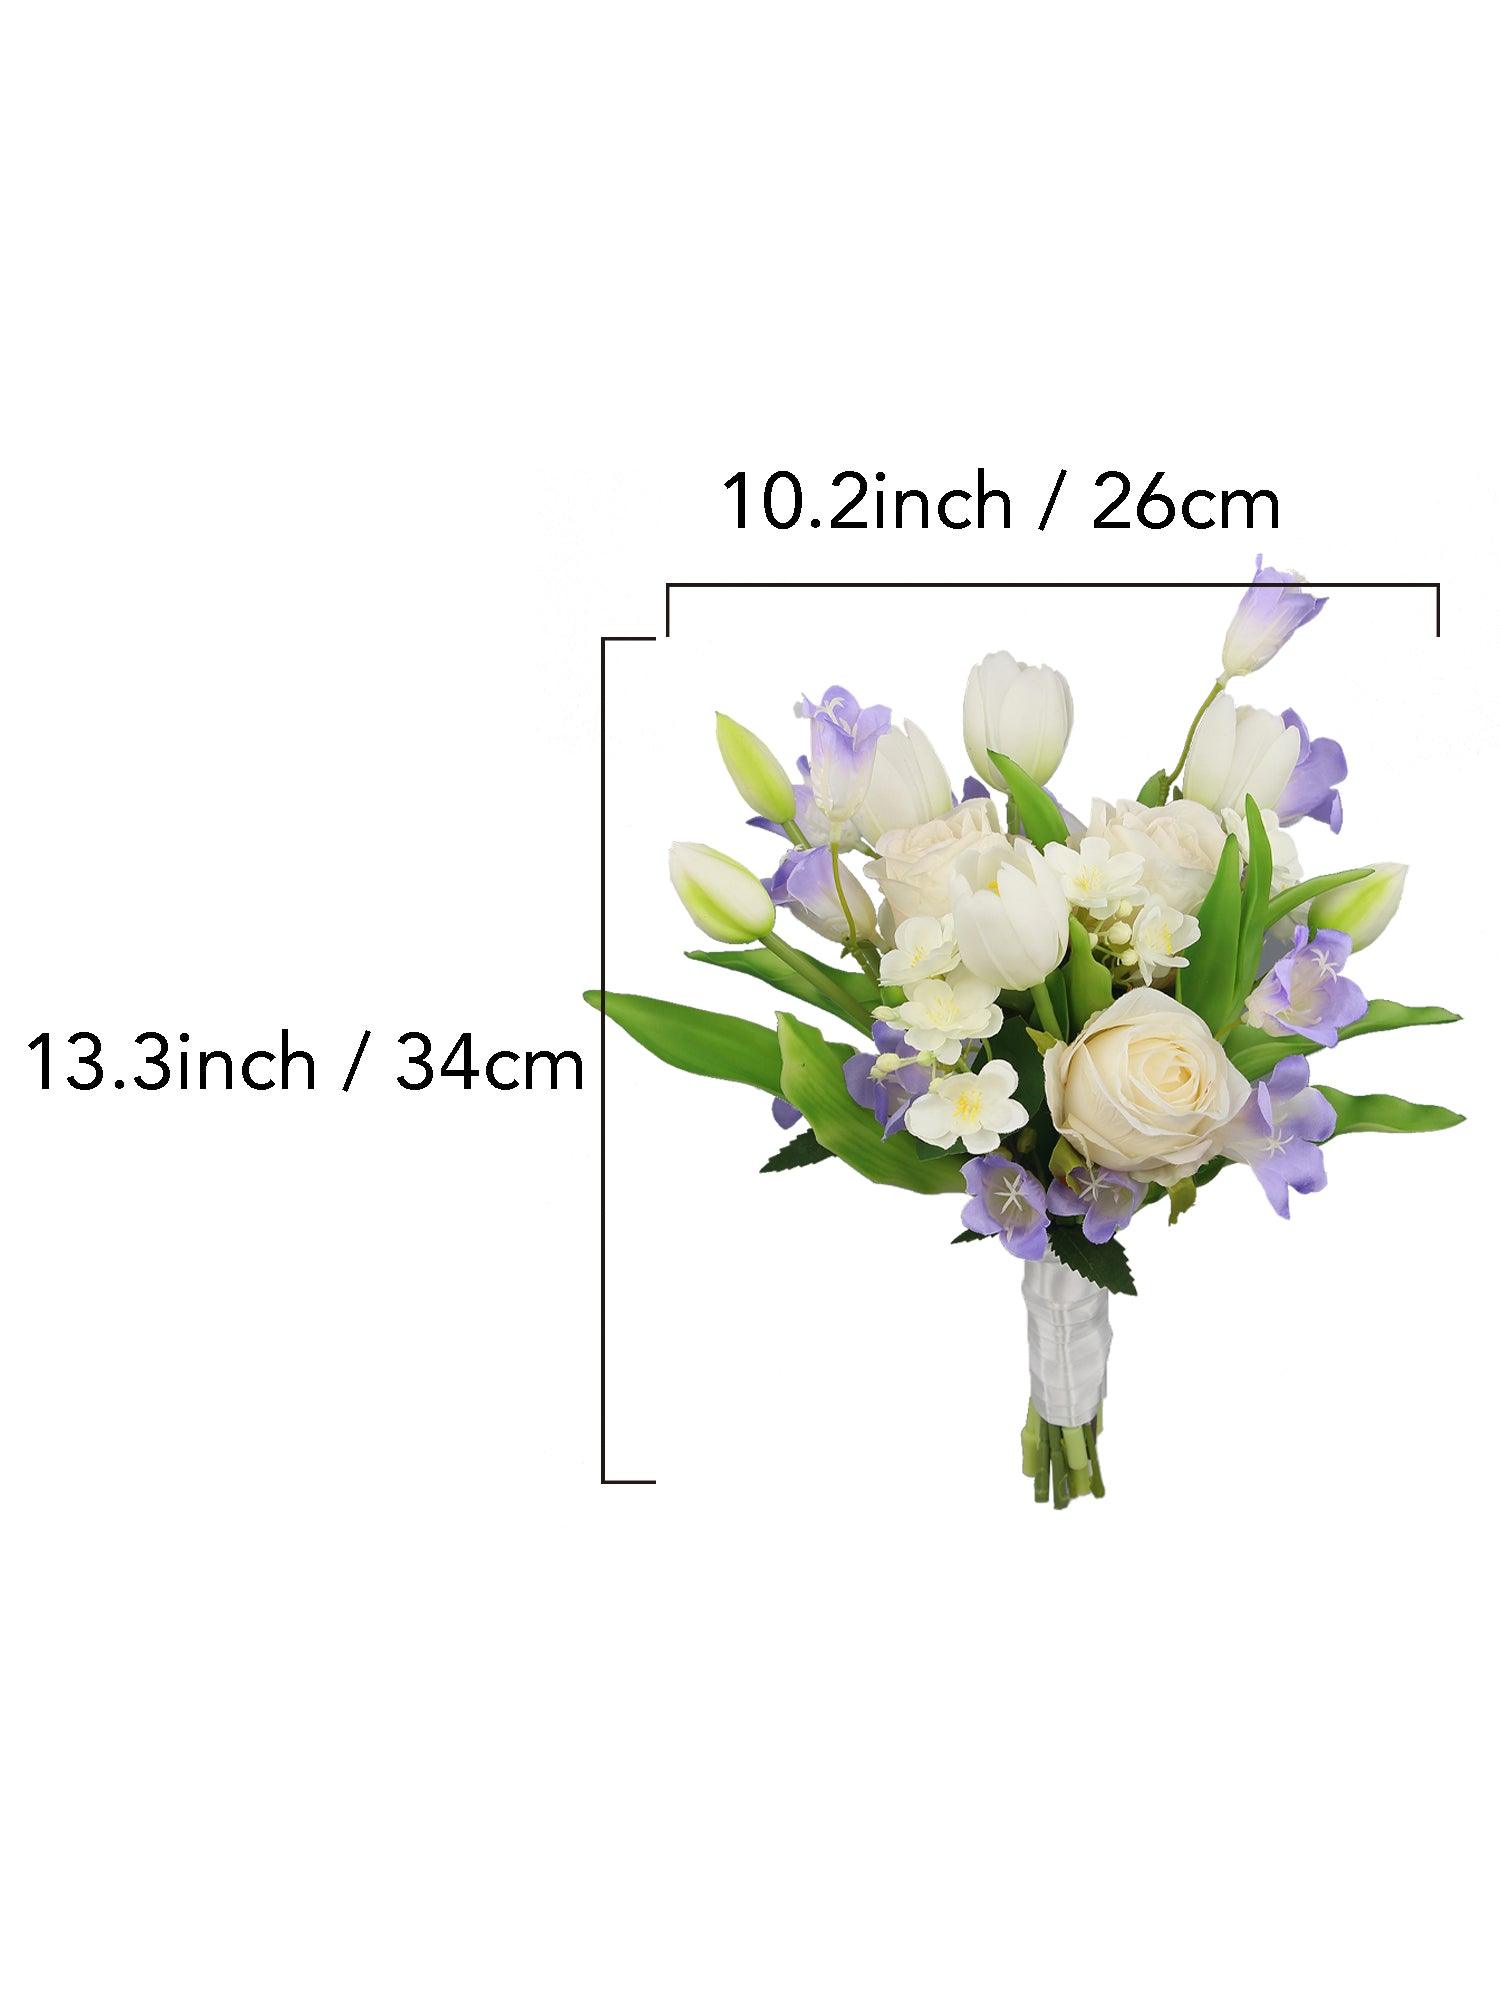 10.3 inch wide Lilac & White Bridal Bouquet - Rinlong Flower